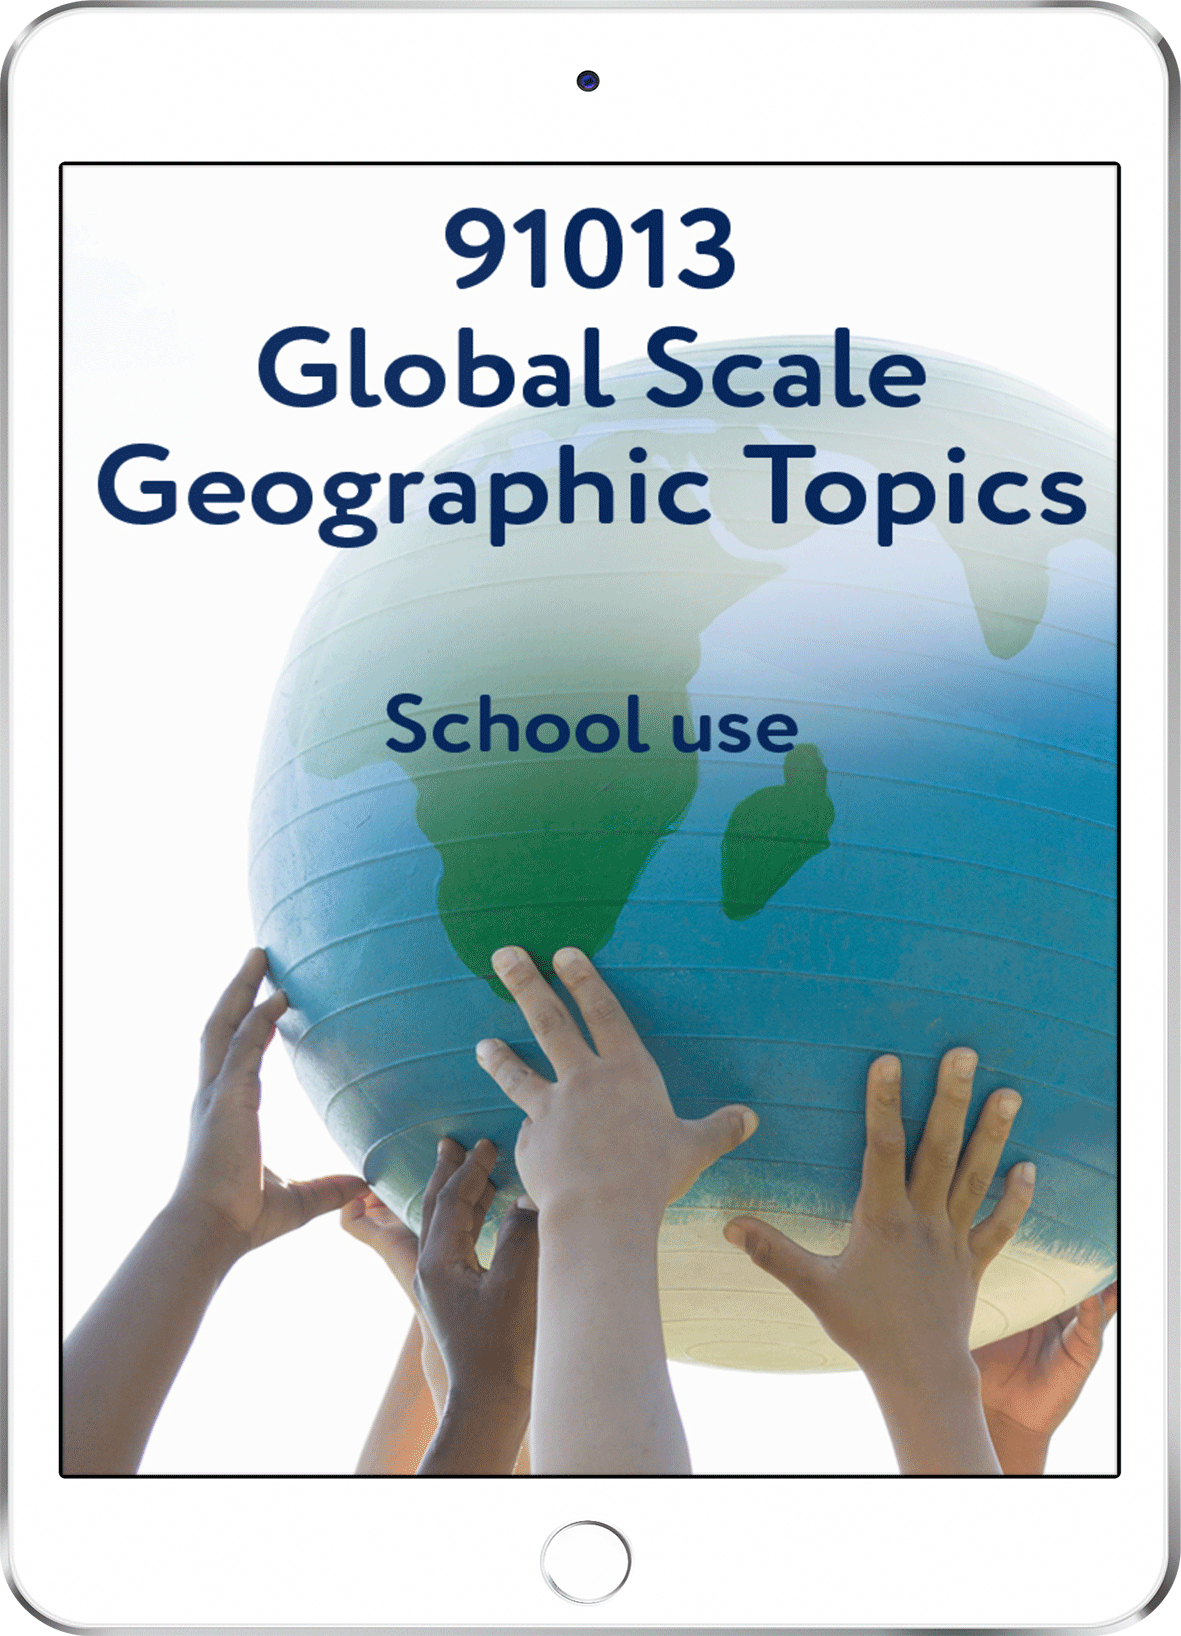 91013 Global Scale Geographic Topics - School Use